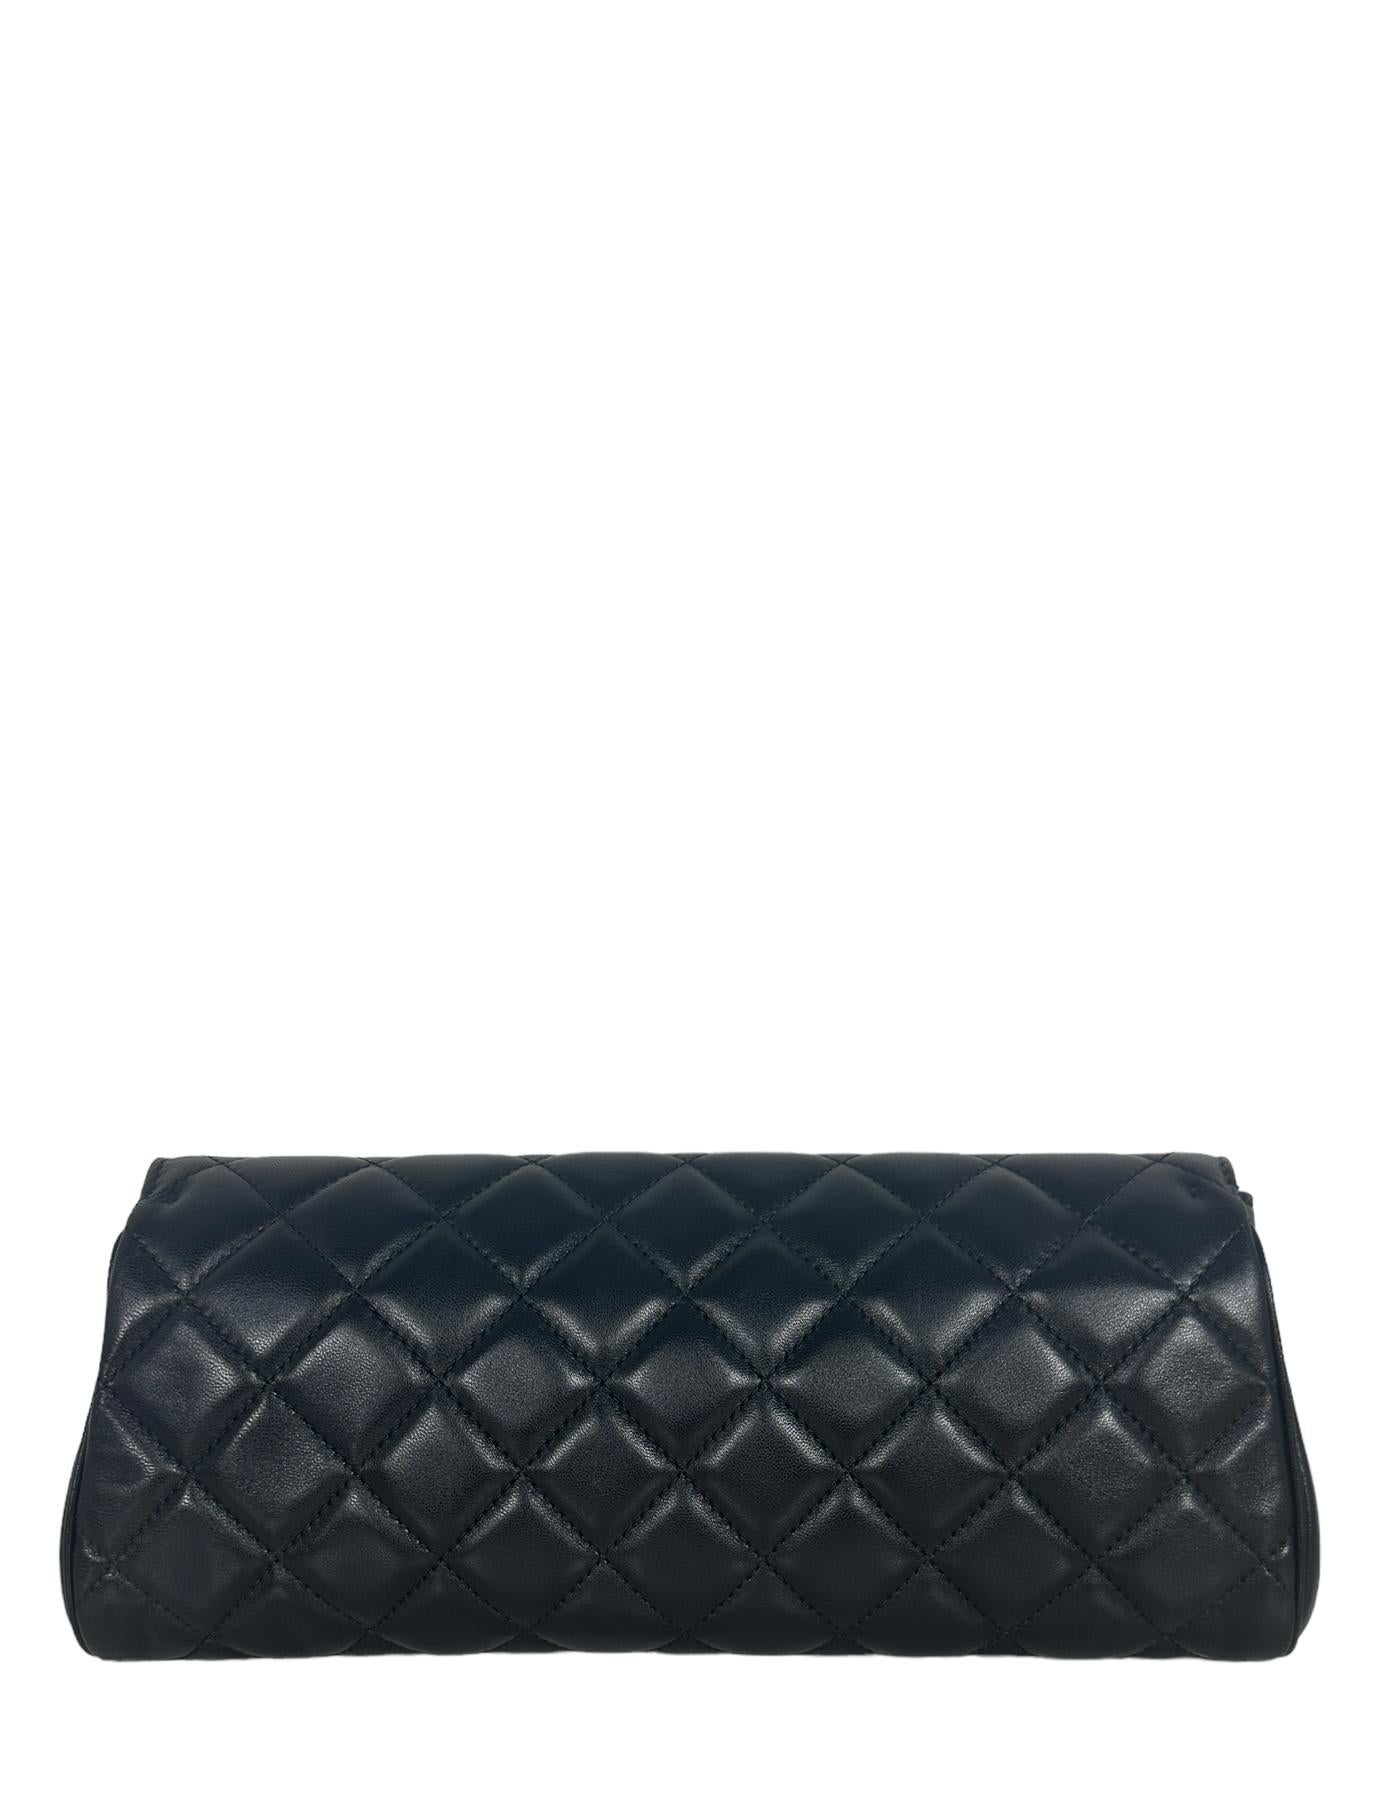 Chanel Black Lambskin CC Twistlock Clutch Bag

Made In: Italy
Year of Production: 2014
Color: Black
Hardware: Darkened silvertone
Materials: Lambskin leather
Lining: Black silk
Closure/Opening: Flap top with cc twistlock closure
Exterior Pockets: